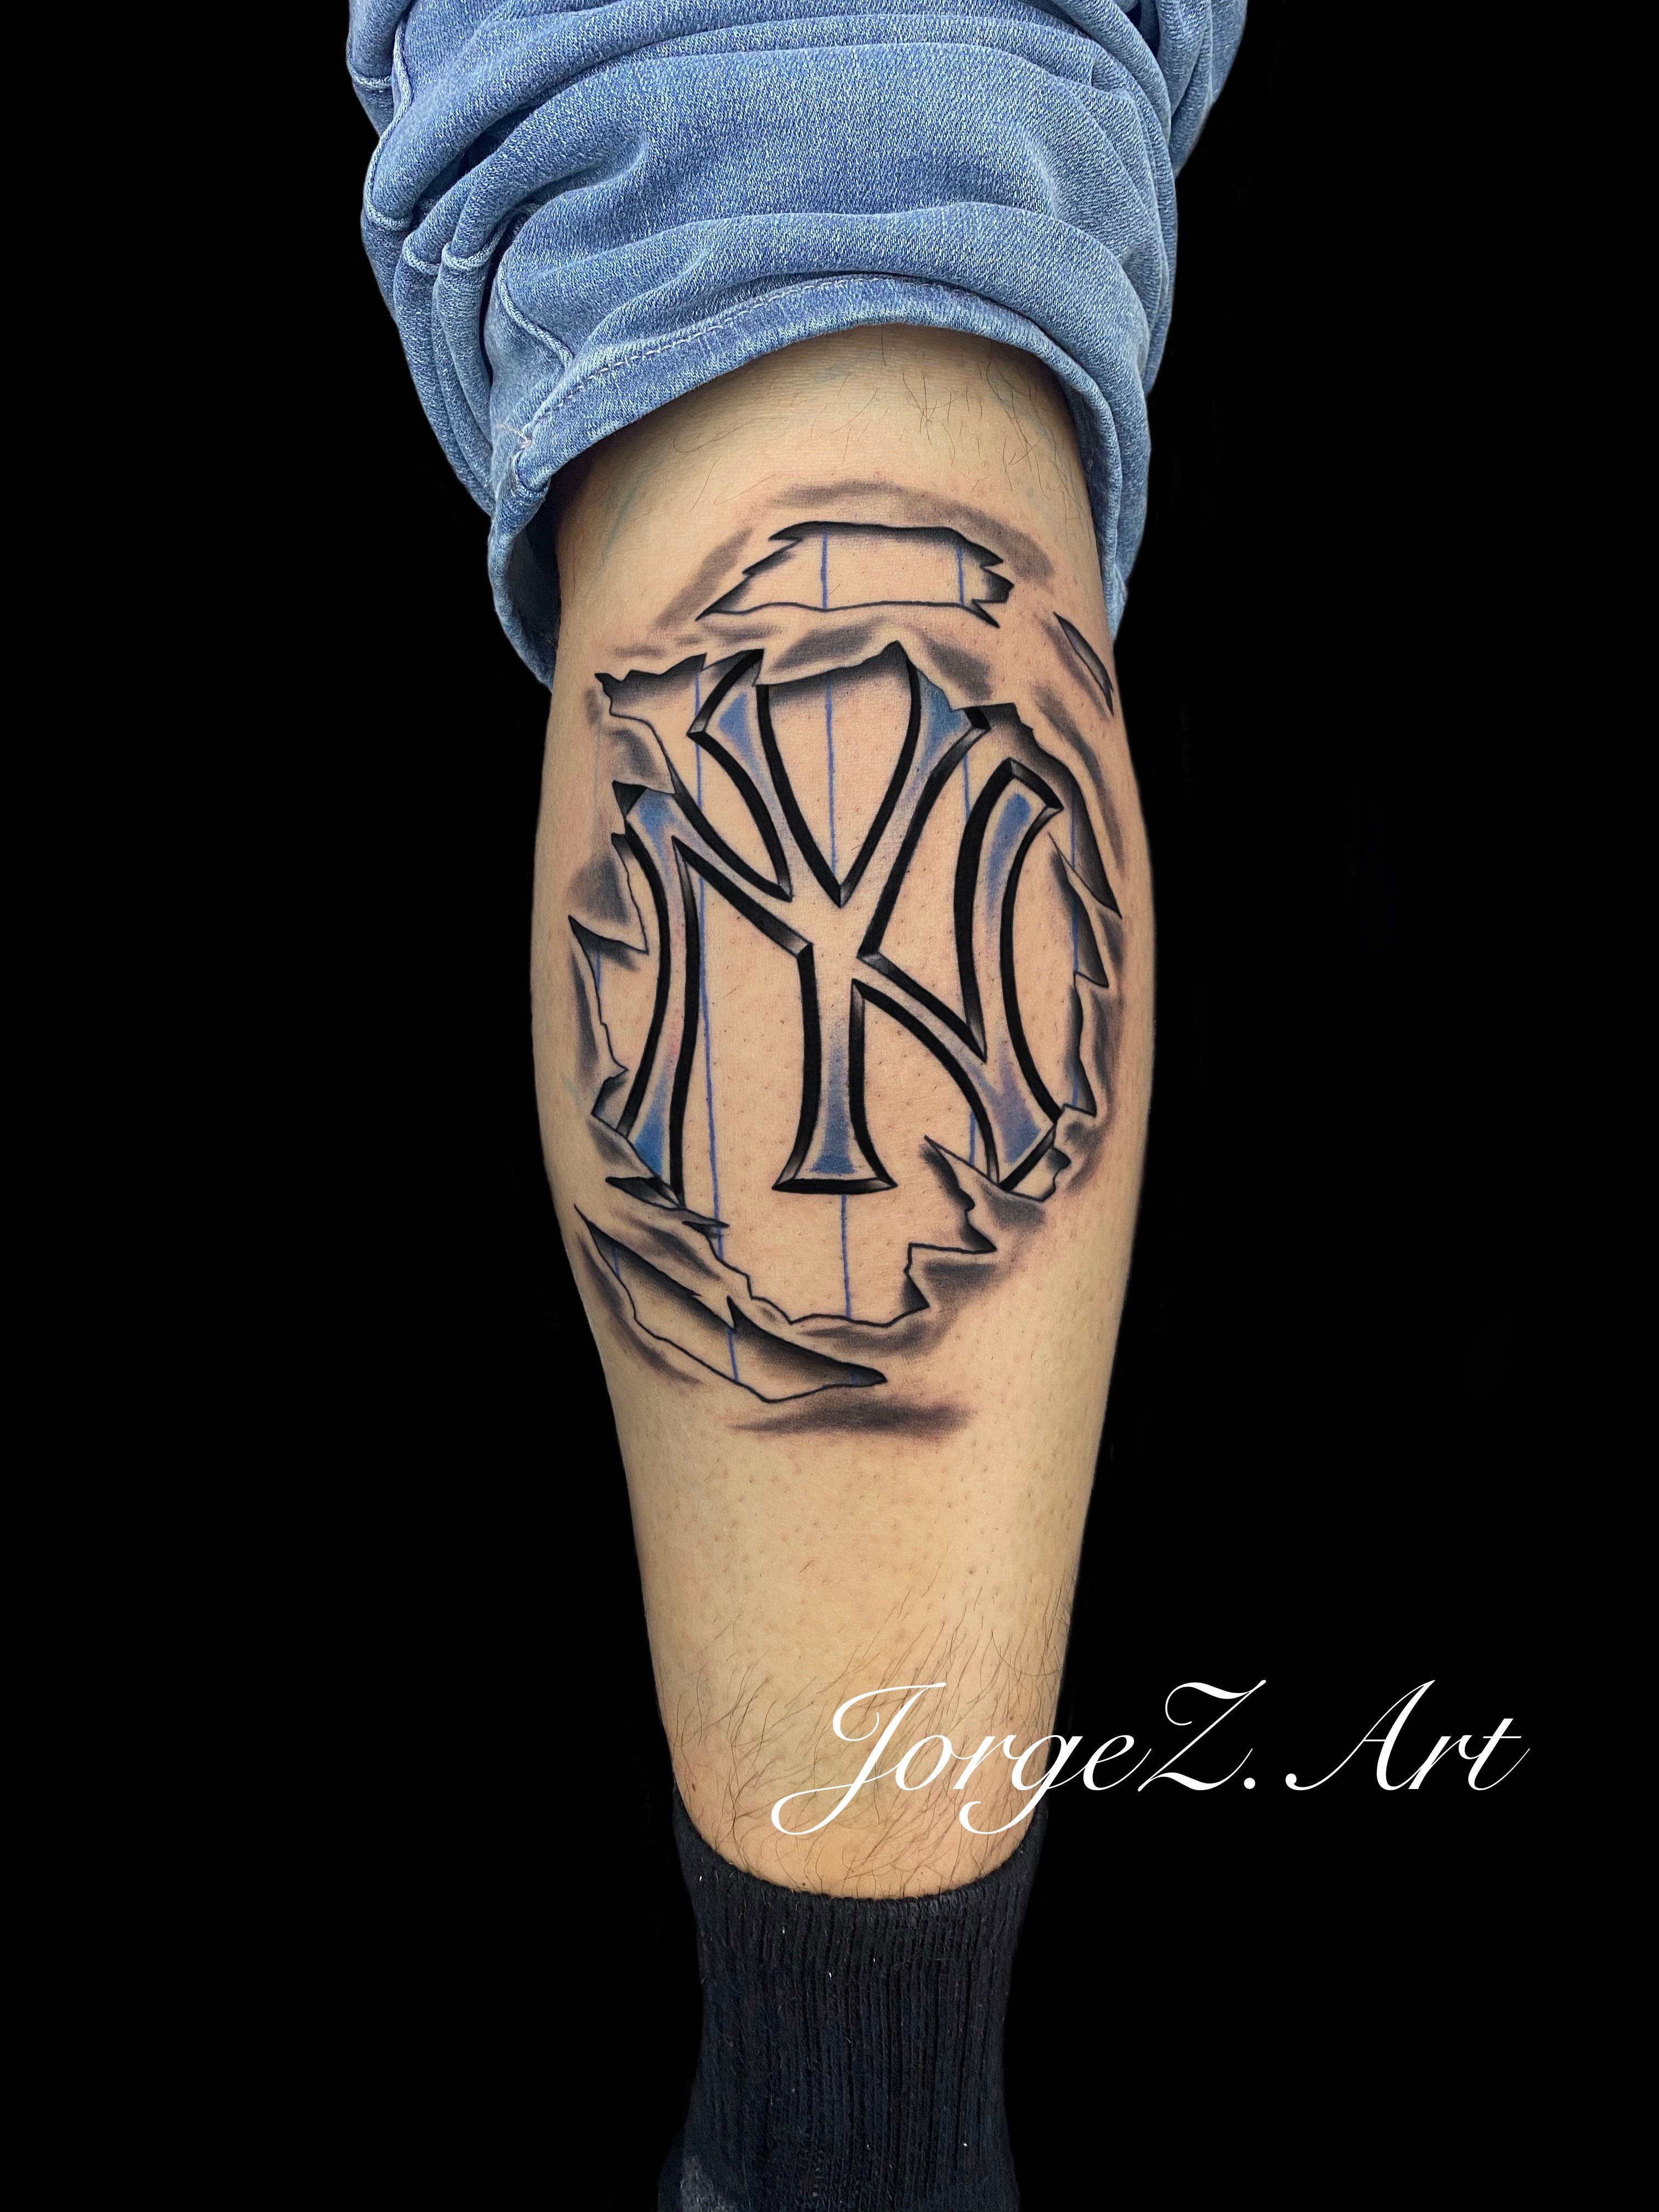 Orlando honors wife with tattoo  02162017  New York Yankees